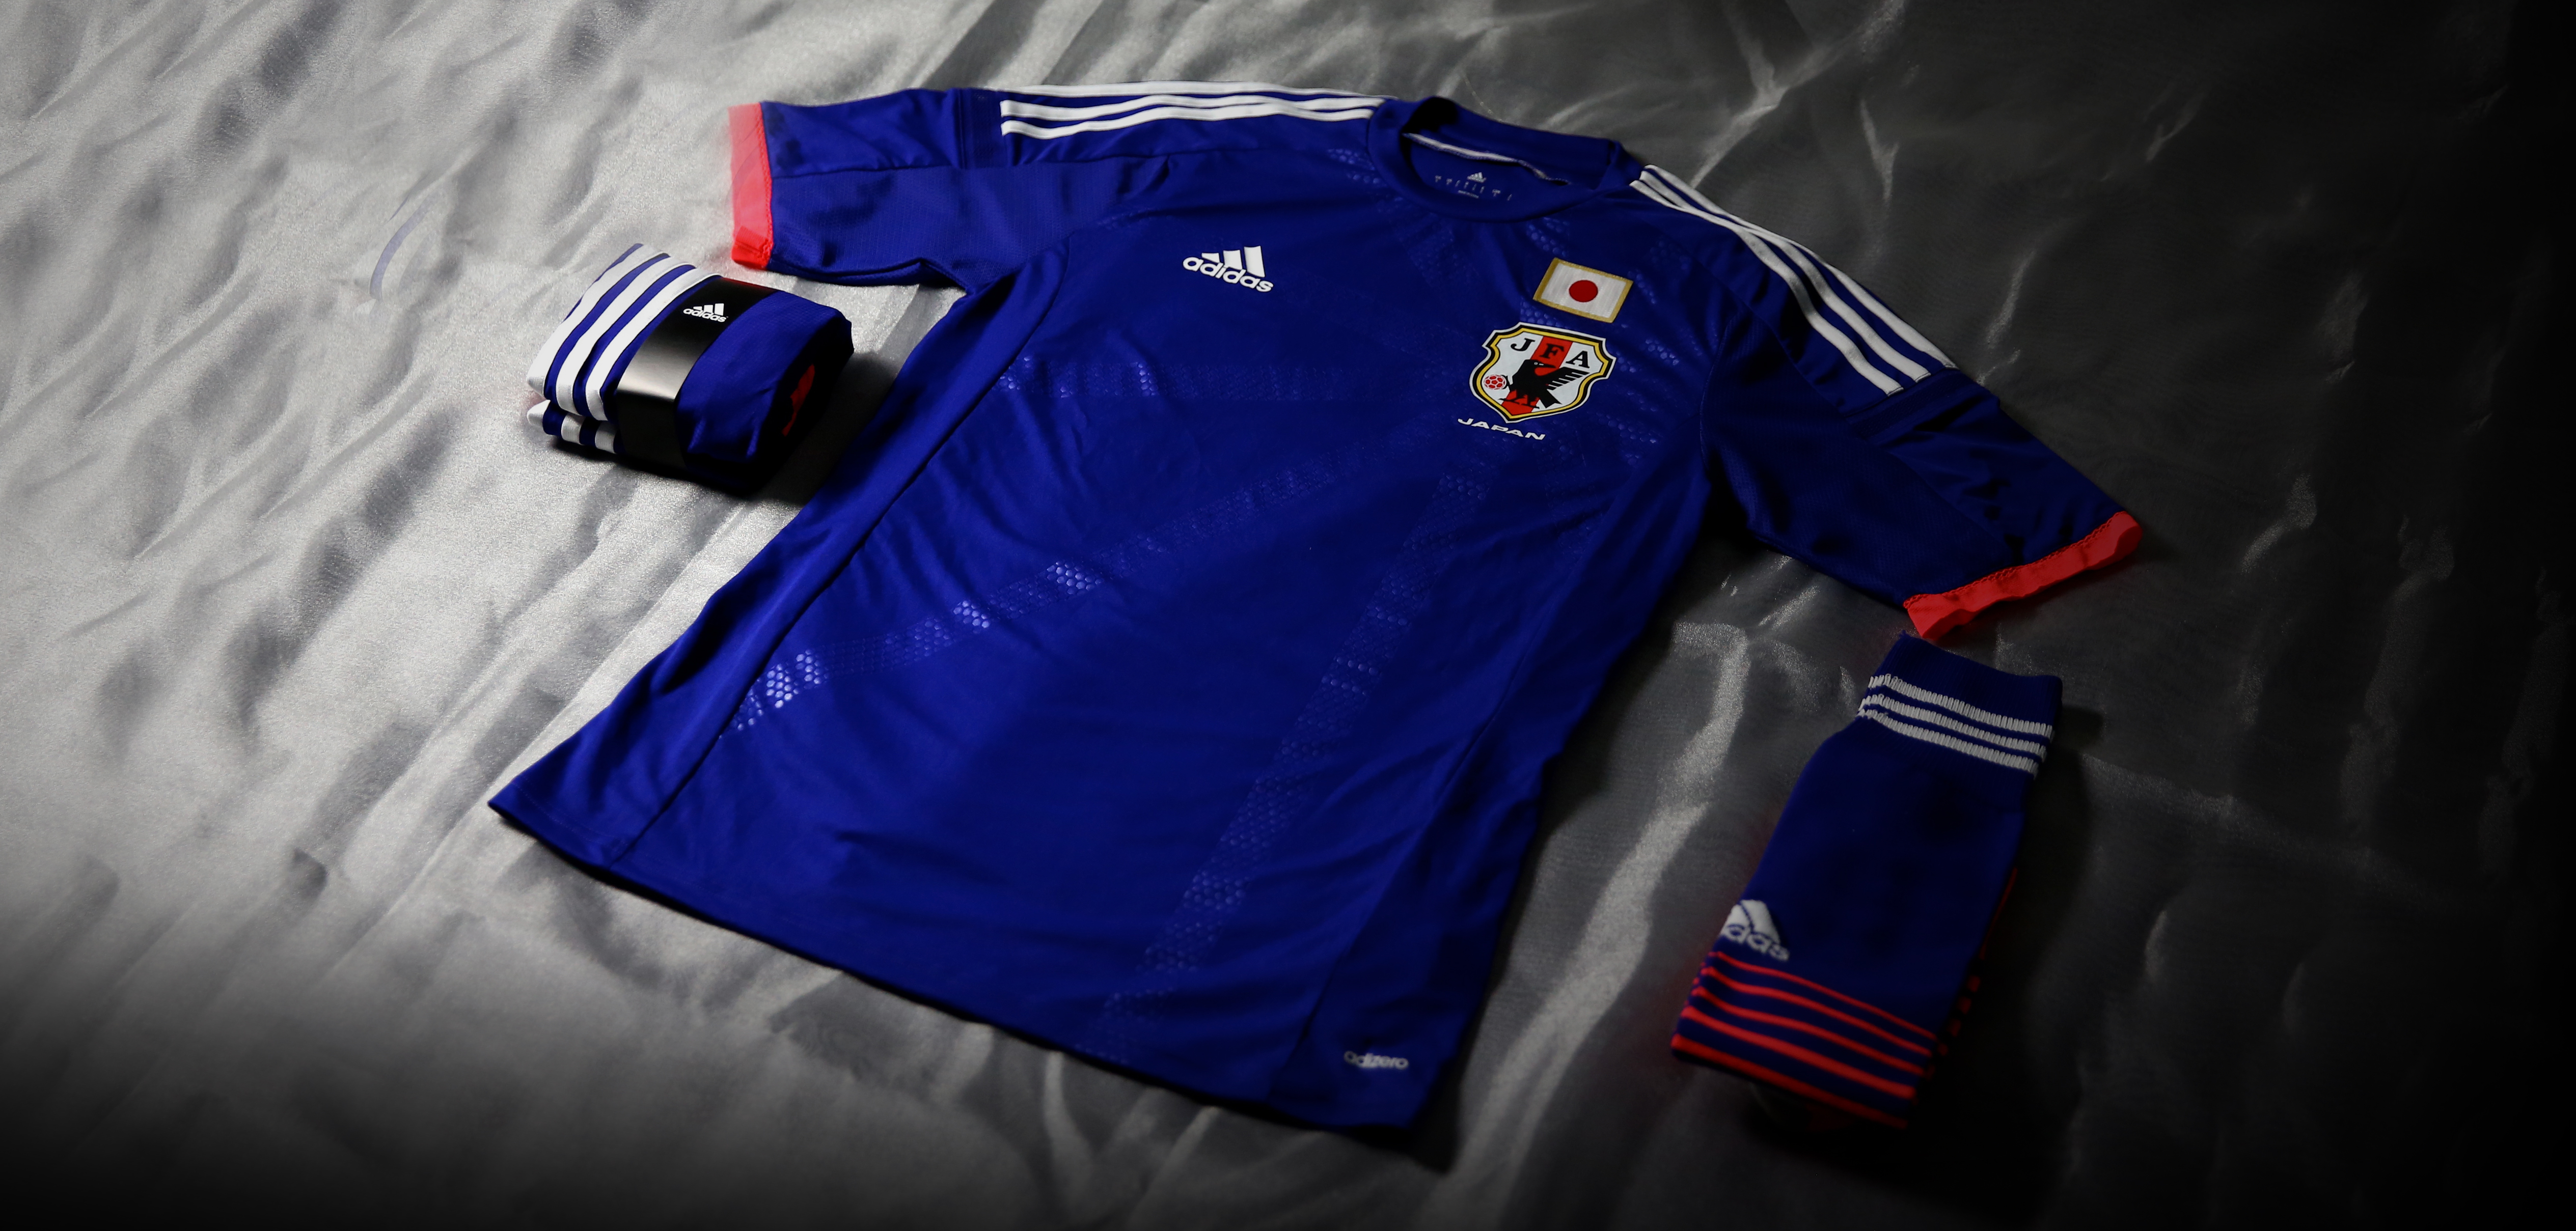 World Cup 2014 football kit release adidas presents new